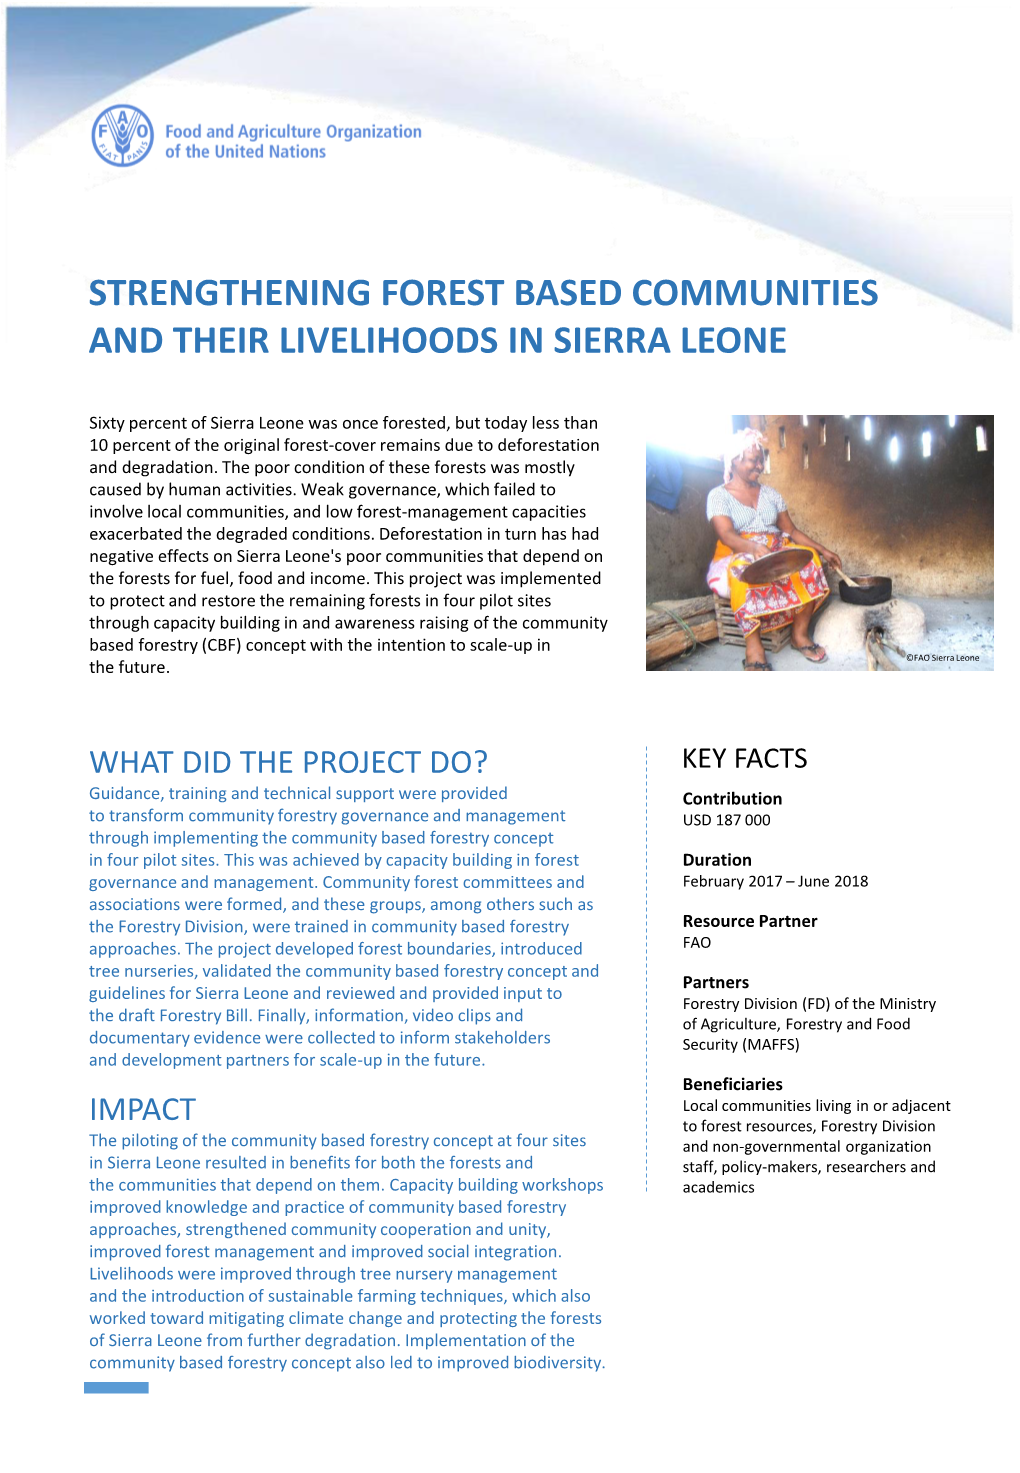 Strengthening Forest Based Communities and Their Livelihoods in Sierra Leone